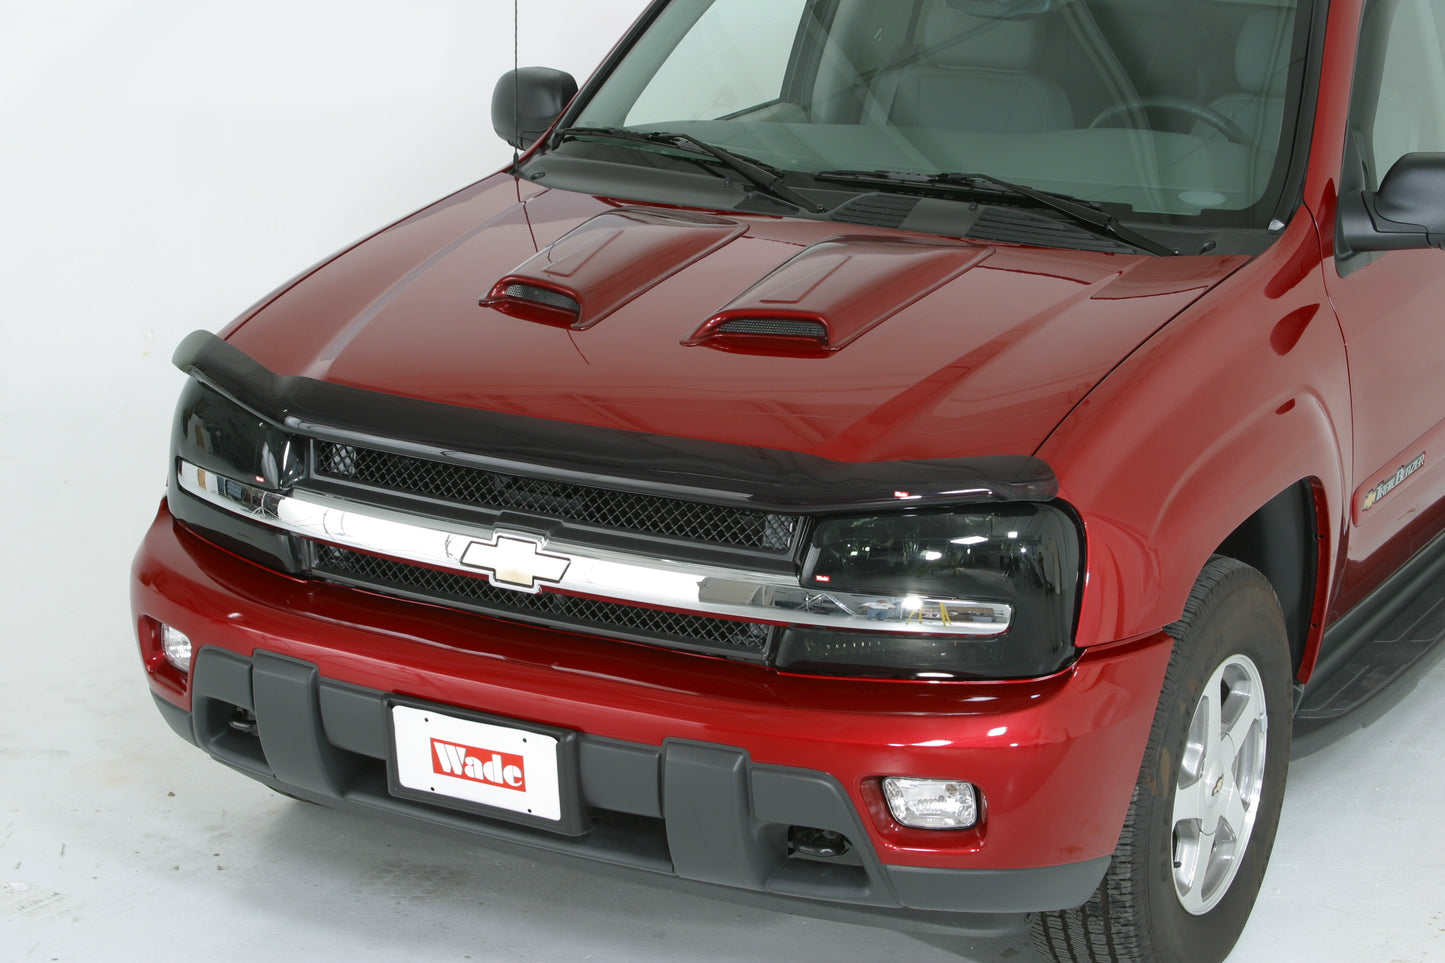 2002 Ford F-Series Head Light Covers